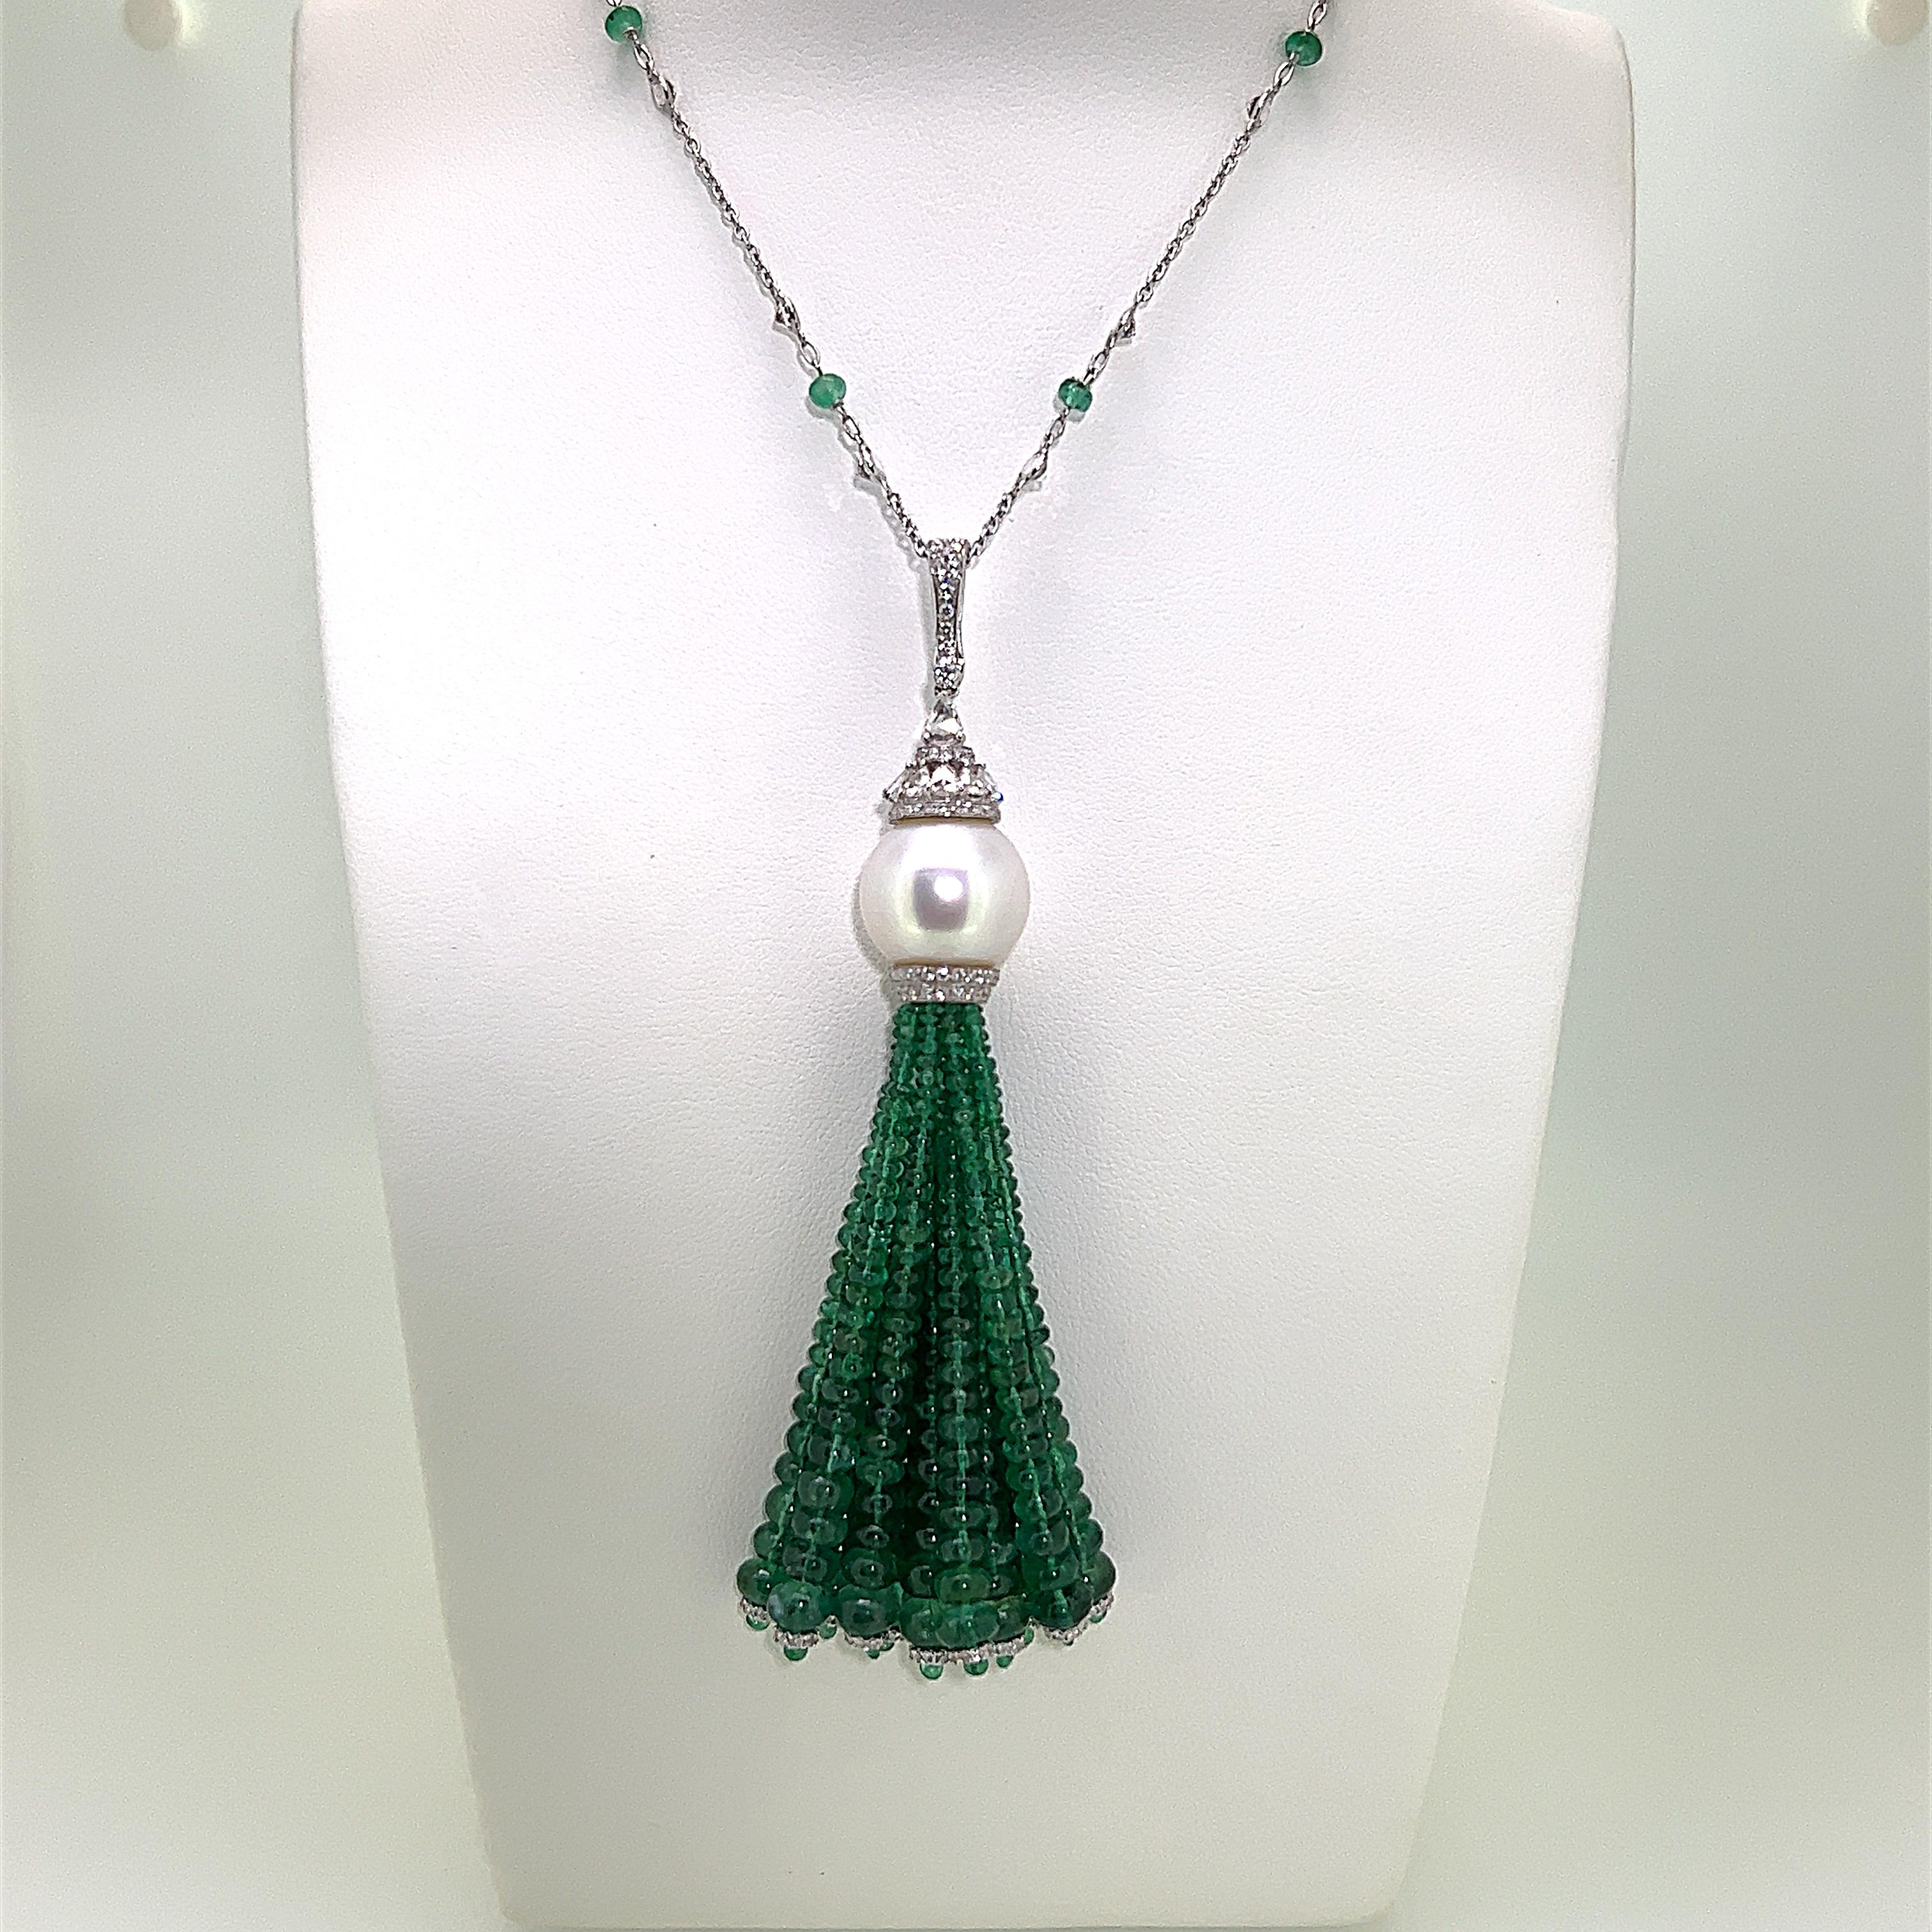 This is a gorgeous looking Emerald, Cultured Pearl and Diamond Tassel Necklace weighing 79.84 carats in total.  This remarkable piece features glimmering Emerald beads with various cut and sizes of Emerald and Diamonds set on 18 Karat White Gold. 